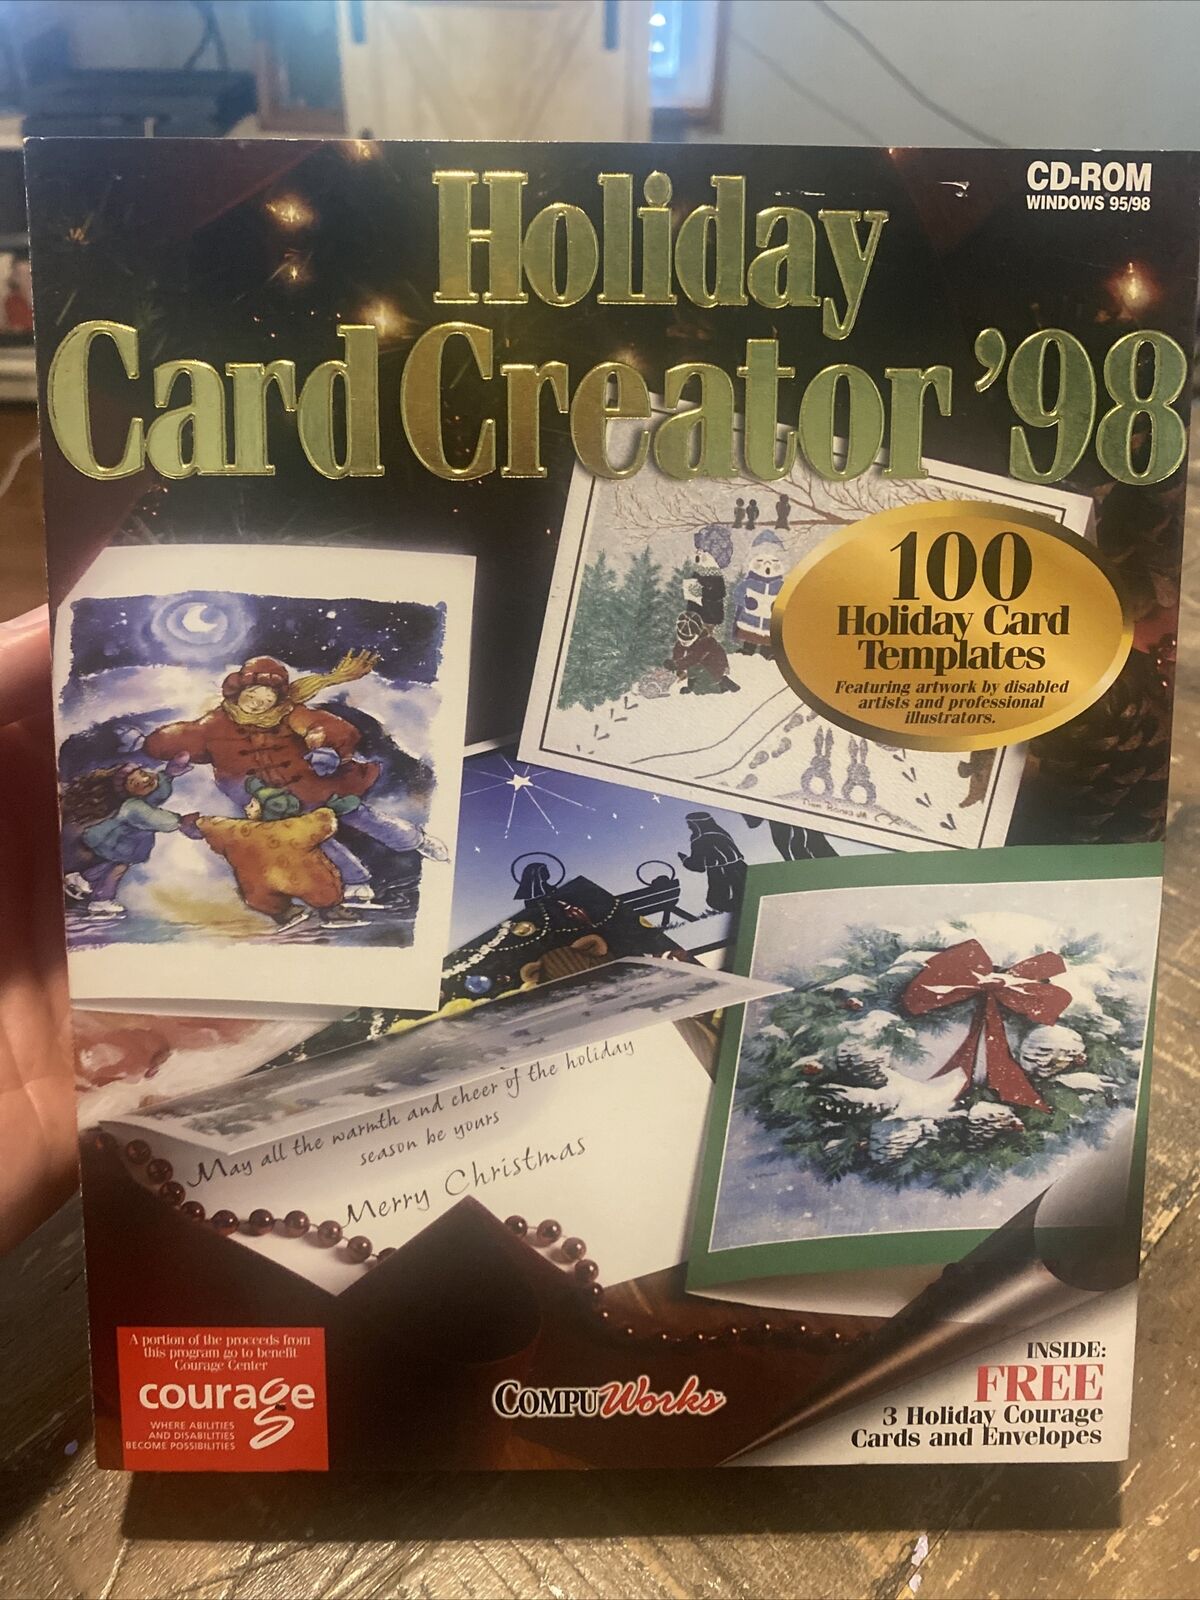 VTG Holiday Card Creator (1998)  by CompuWorks - Sealed New Old Stock